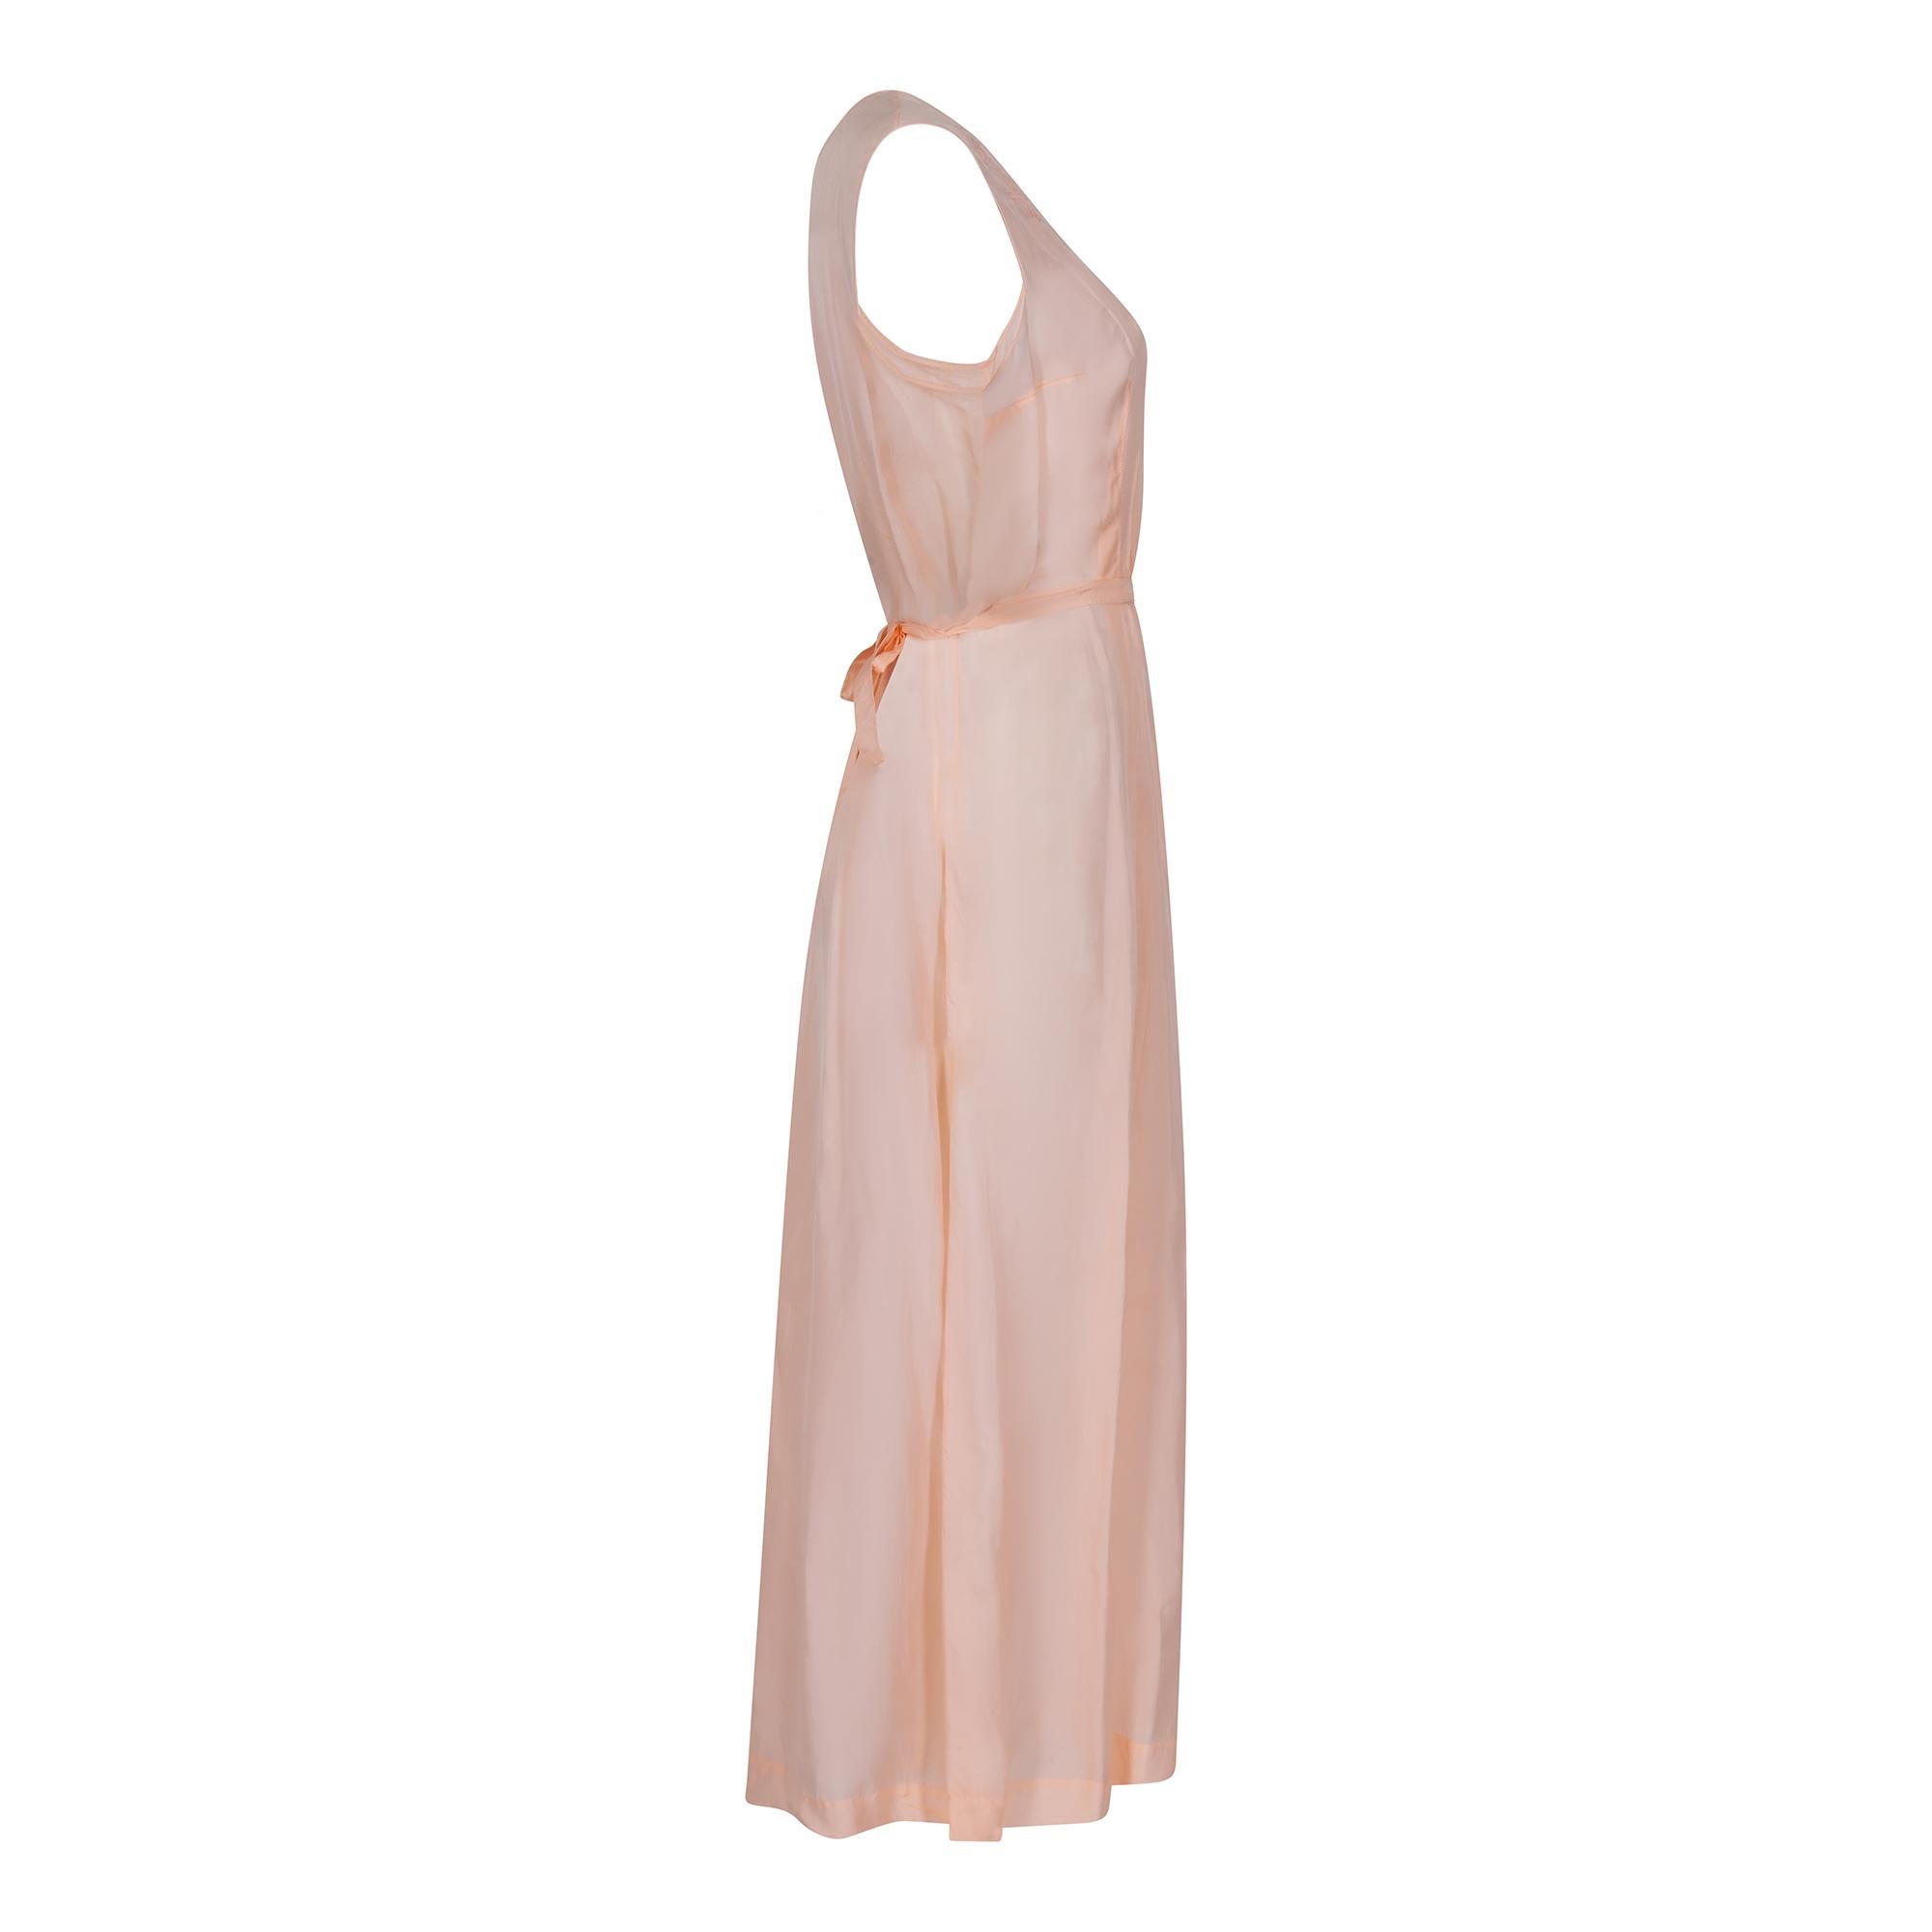 Early 1930s peach embroidered floral slip in incredible antique condition. This piece is made from a man made silk blend in a really beautiful soft peach colour. There are some pleasing design details on this dress including the embroidered neckline